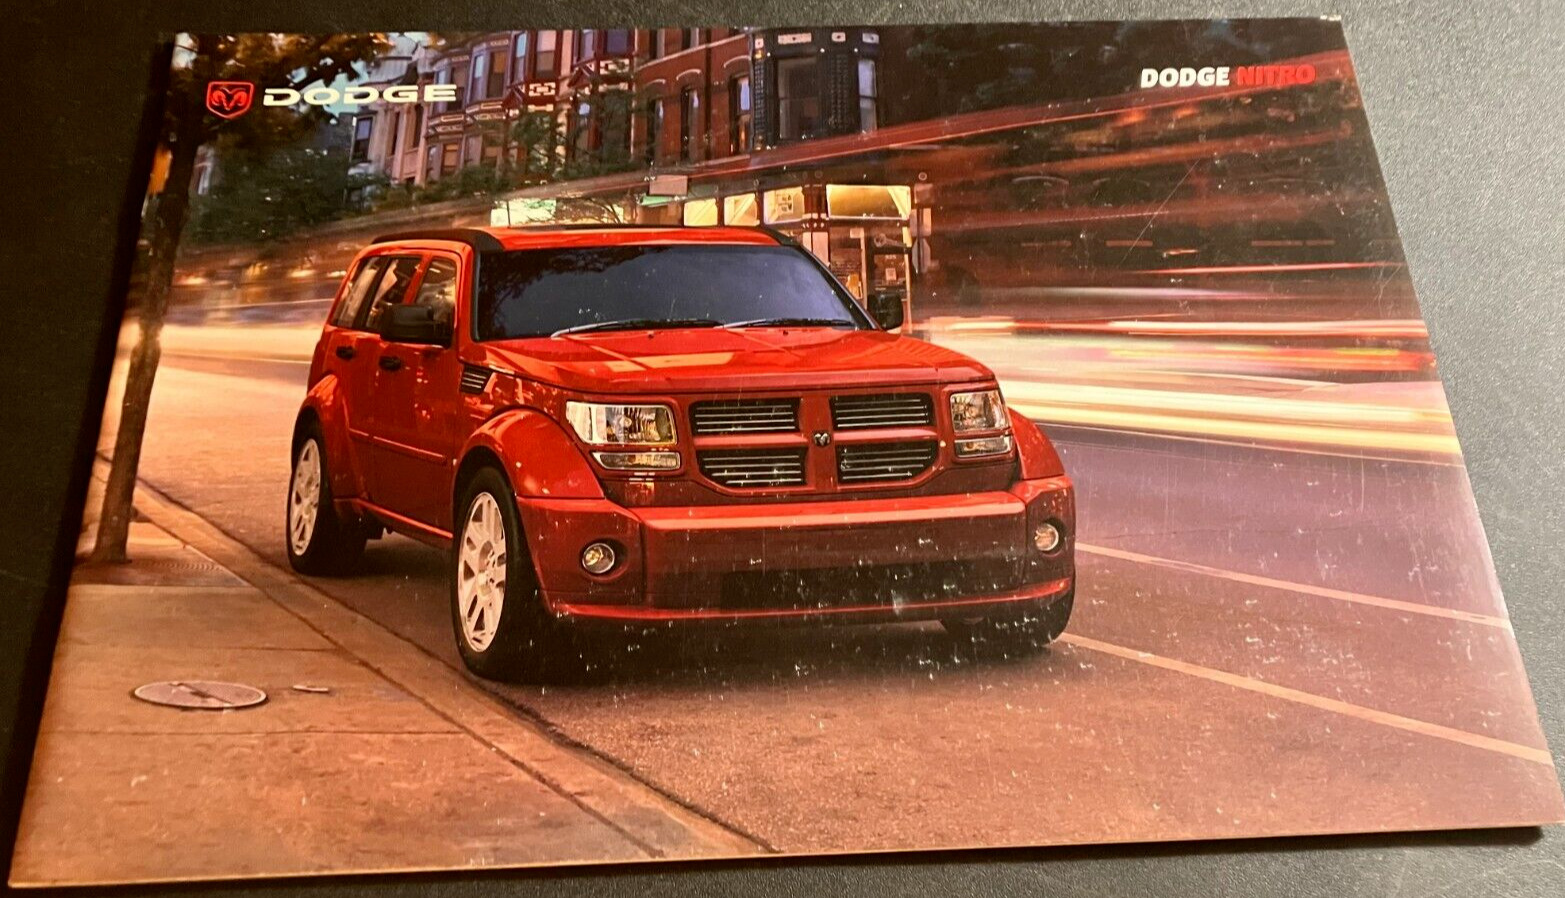 2007 Dodge Nitro - 22-Page Dealer Sales Brochure with Color Chart - JAPANESE